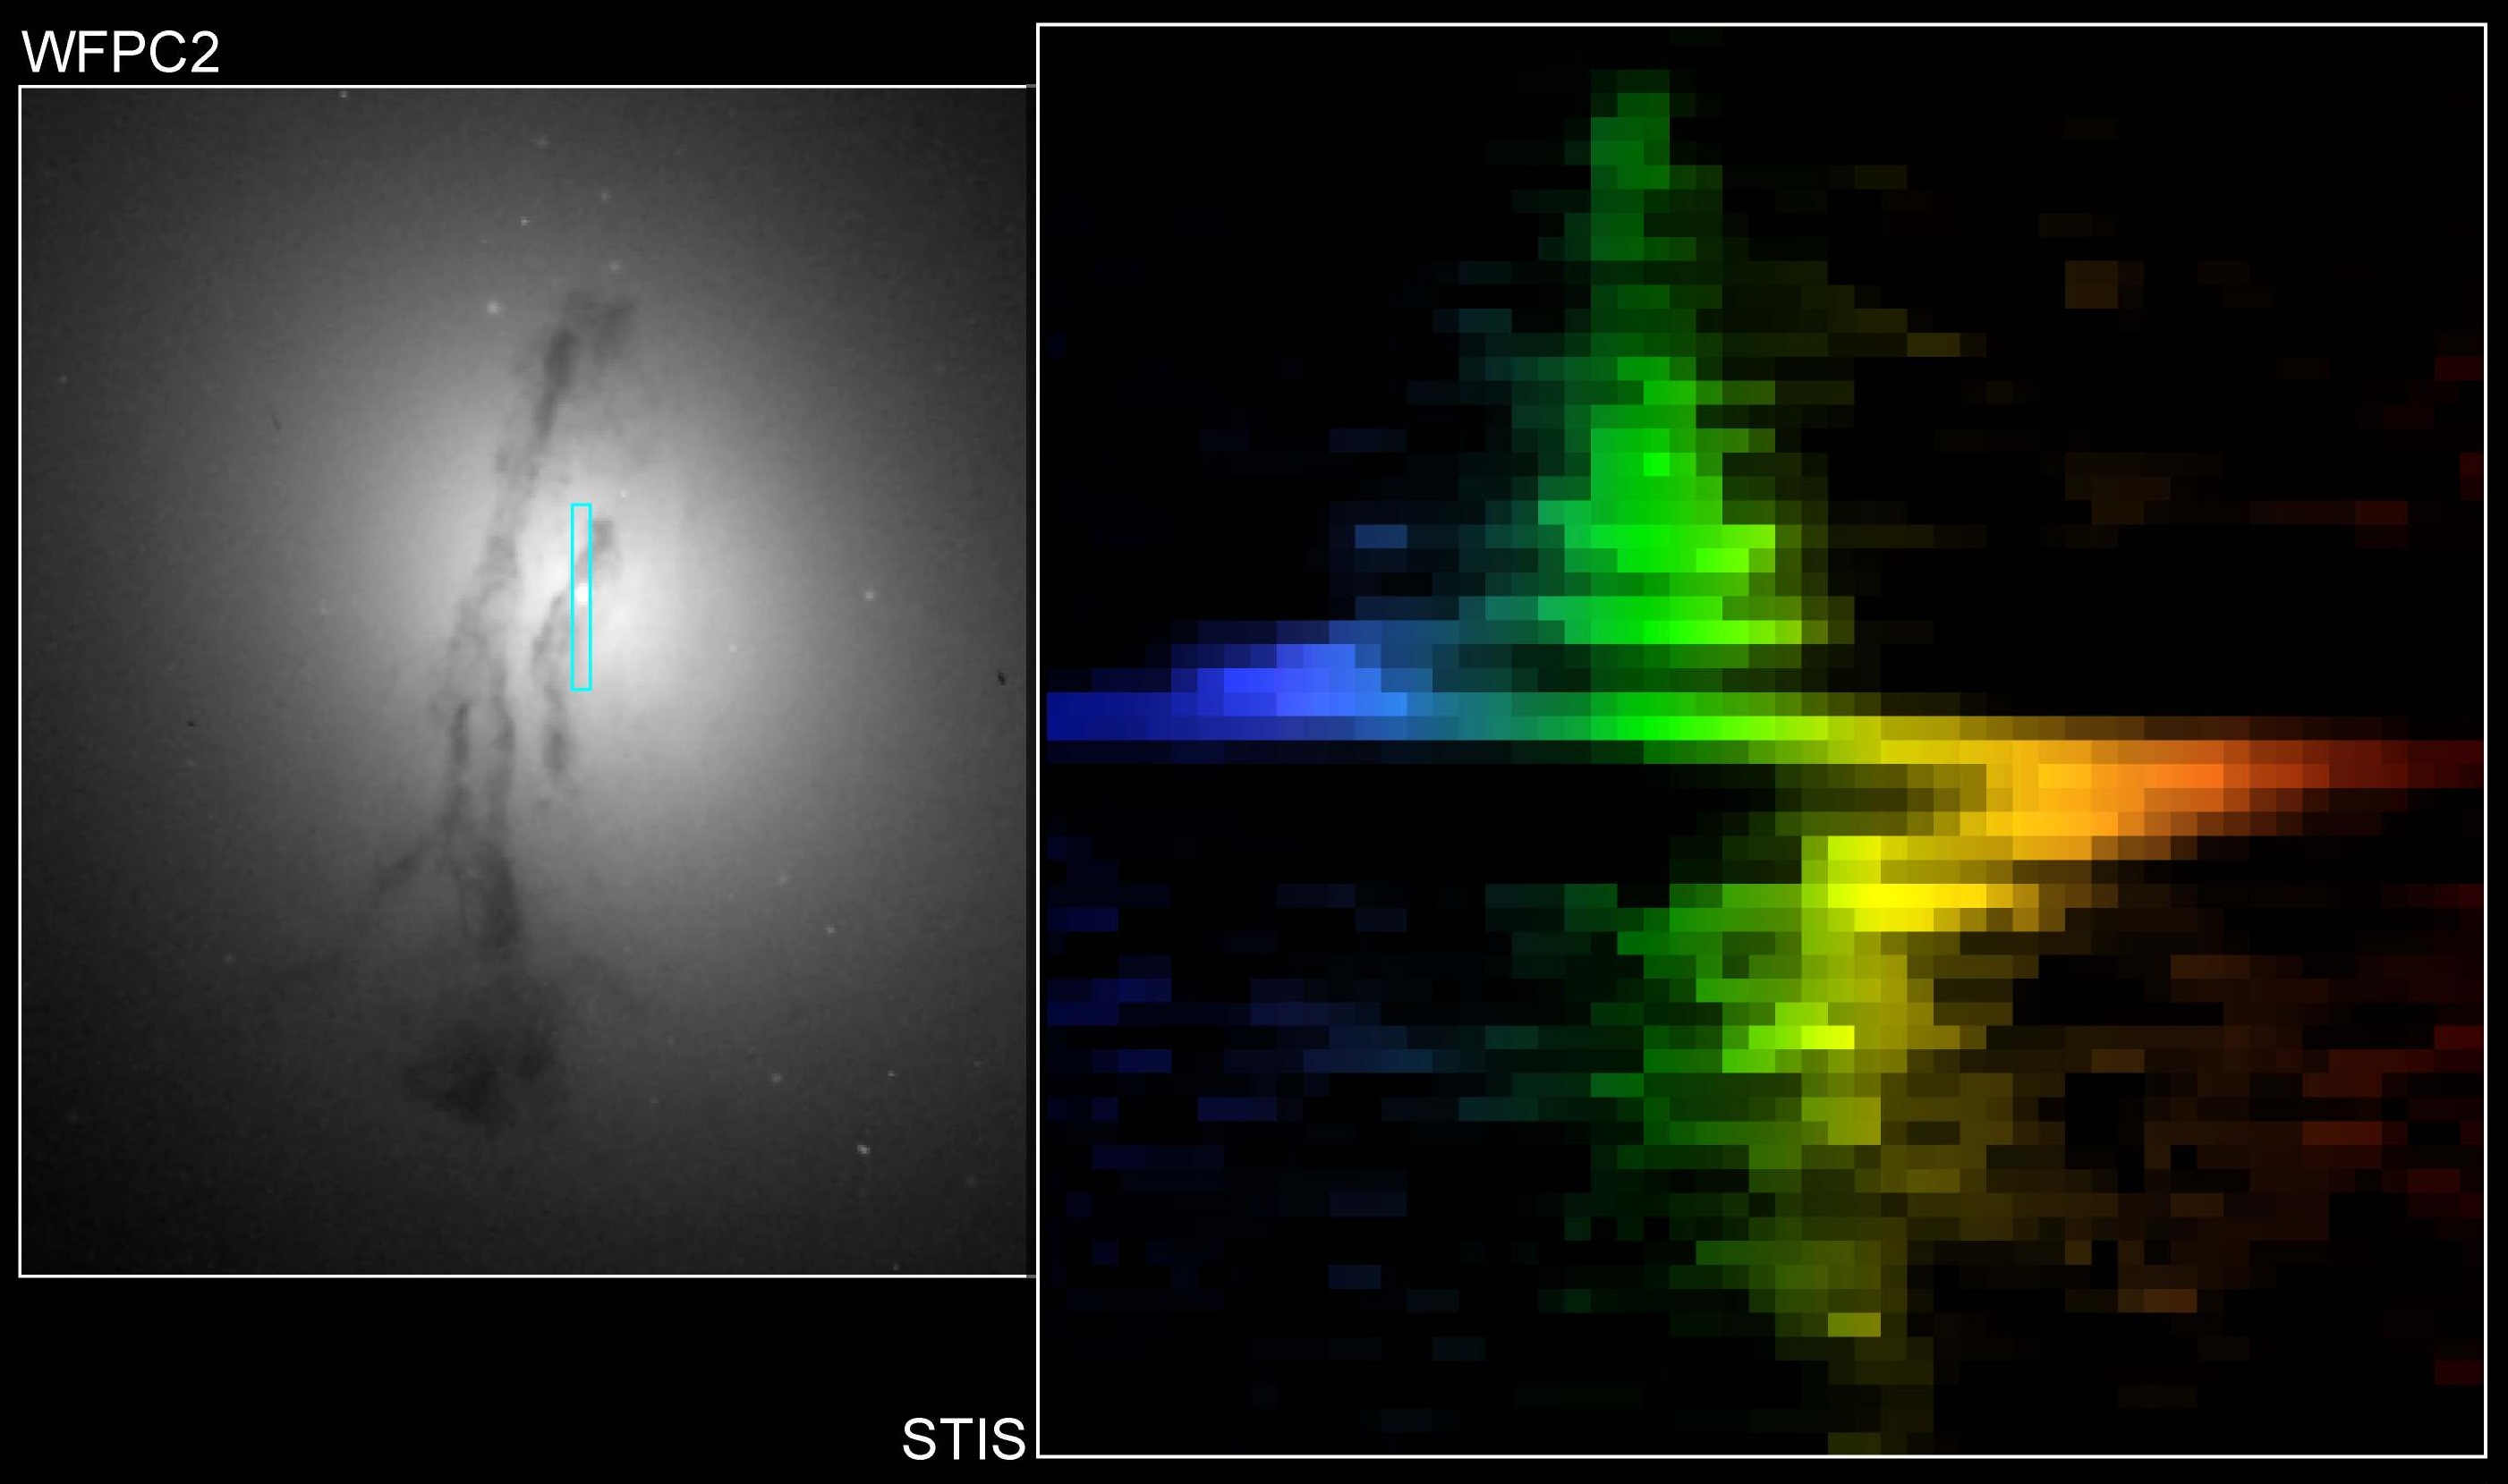 Two images next to each other. On the left is a bright light in black and white, and on the right is a wavelength of light, blue green, yellow, orange, and red, representing the spectrographic view.